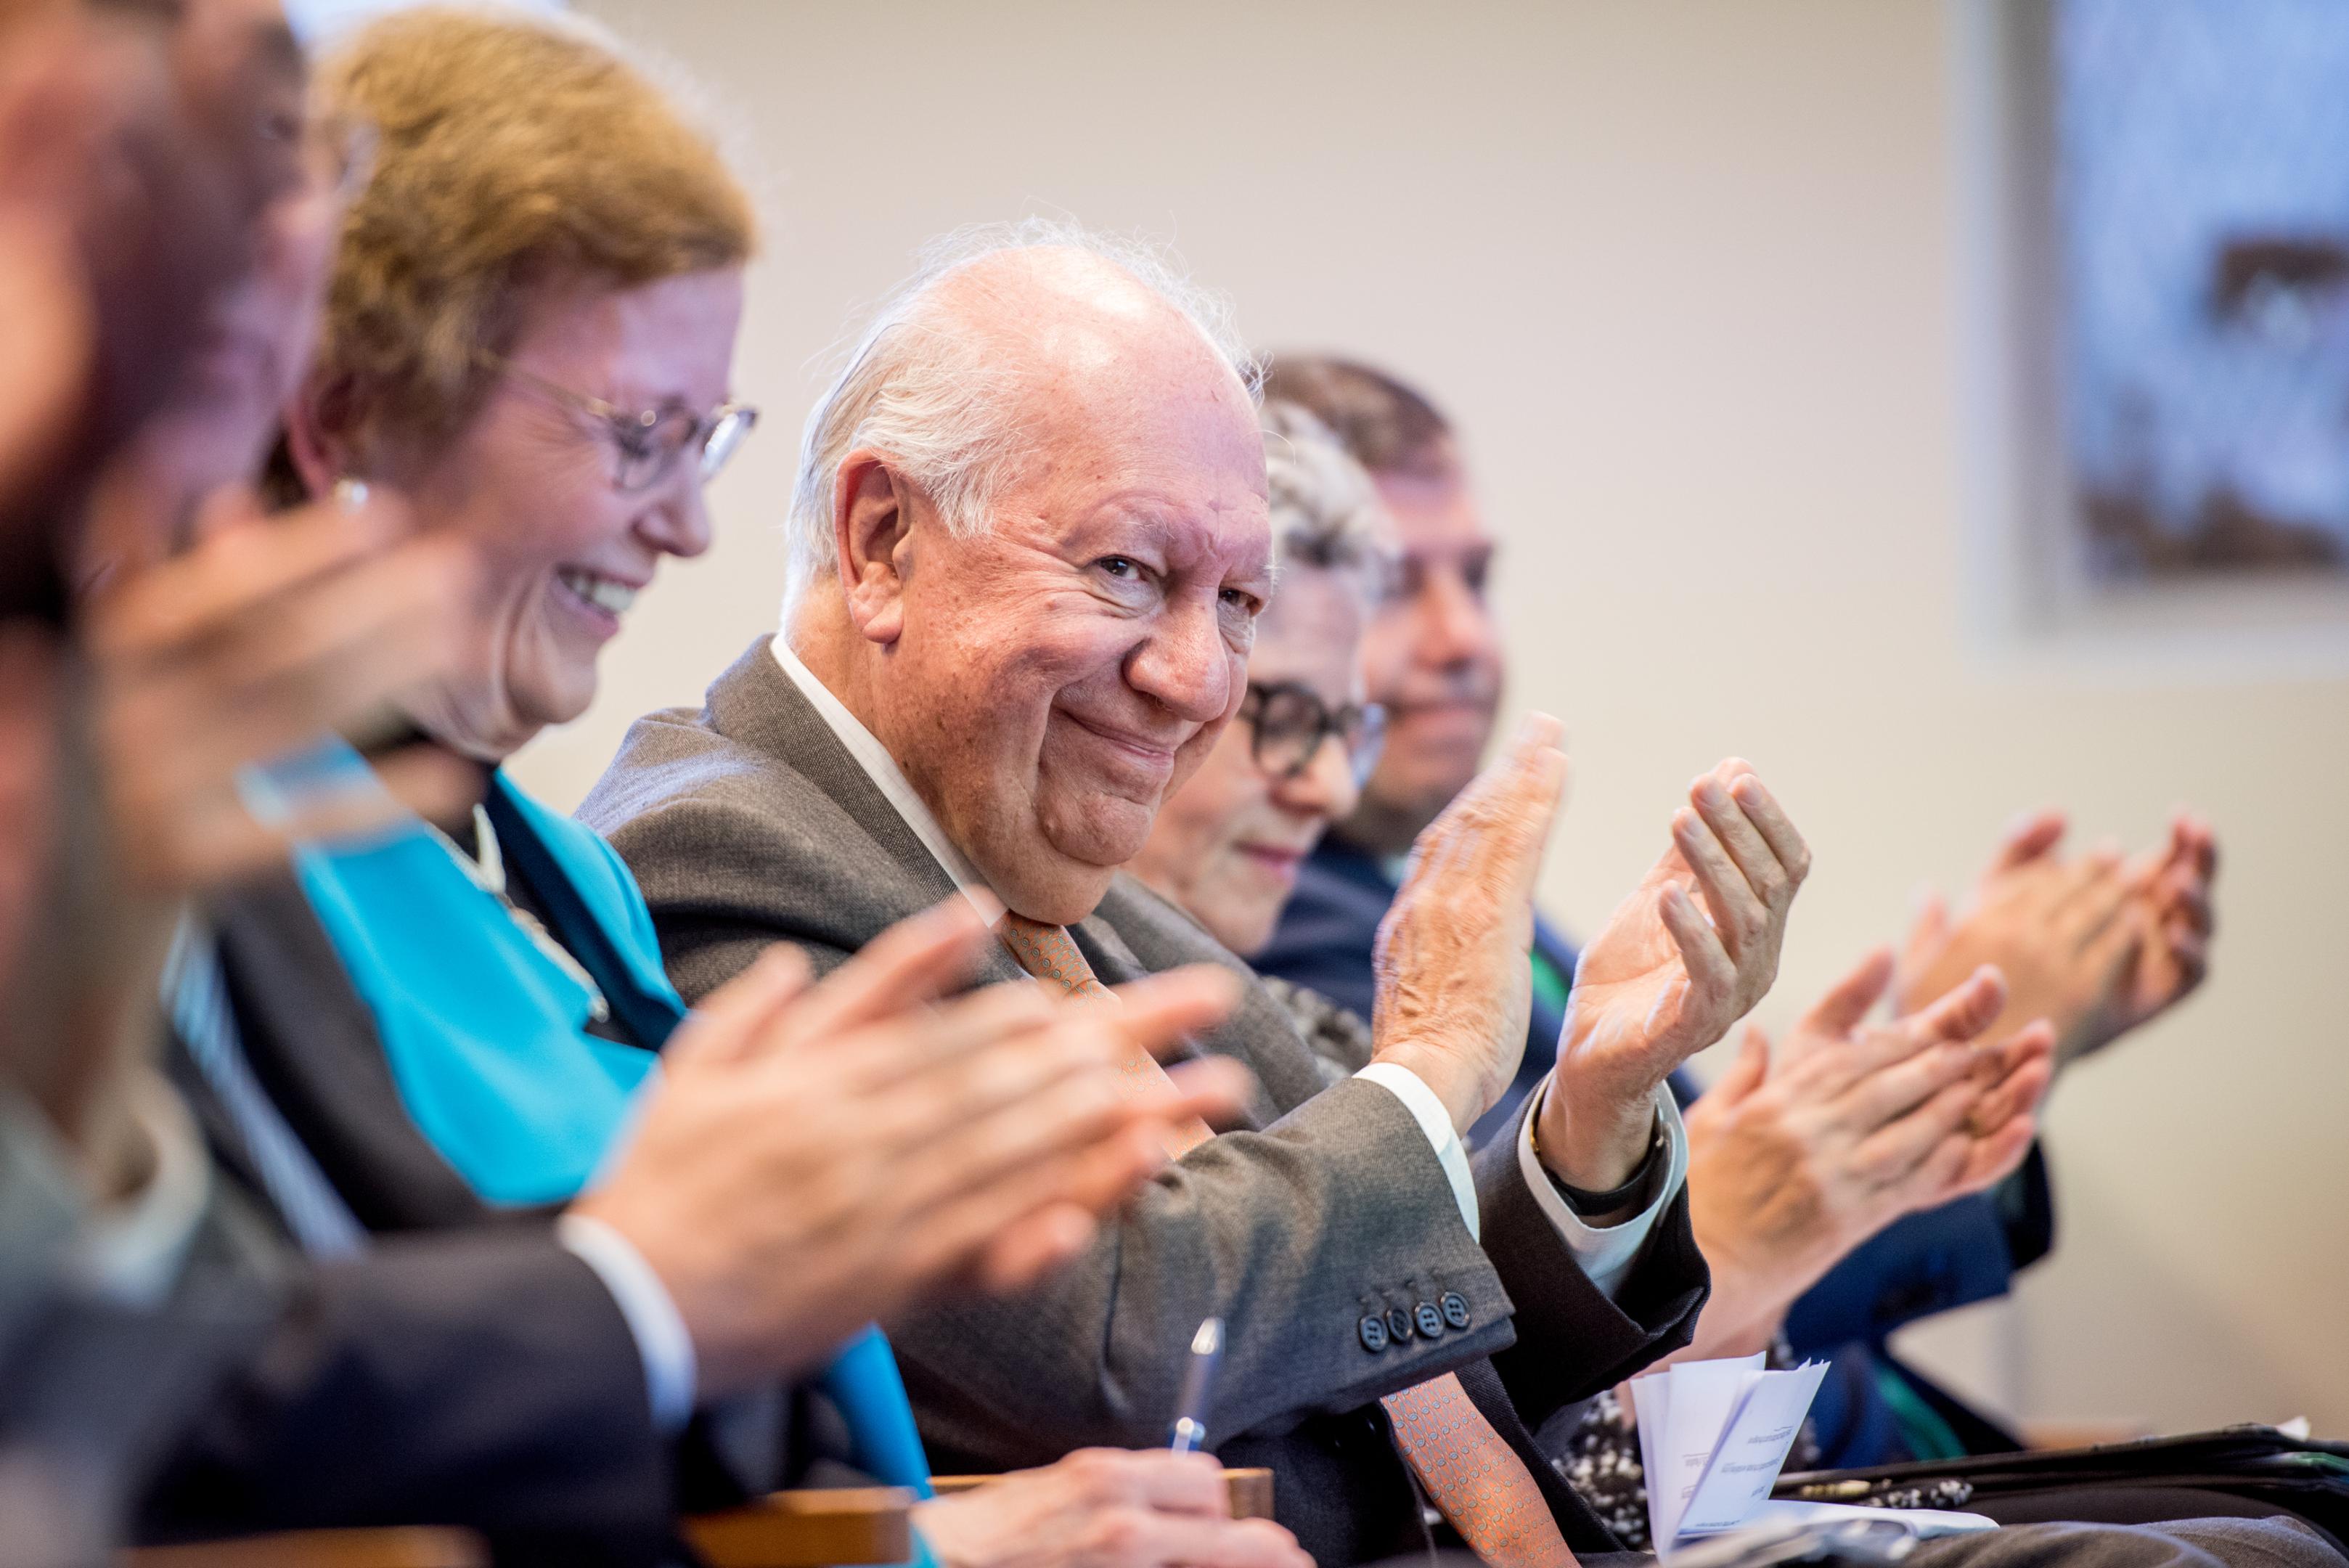 Mary Robinson, former president of Ireland, and Ricardo Lagos, former president of Chile